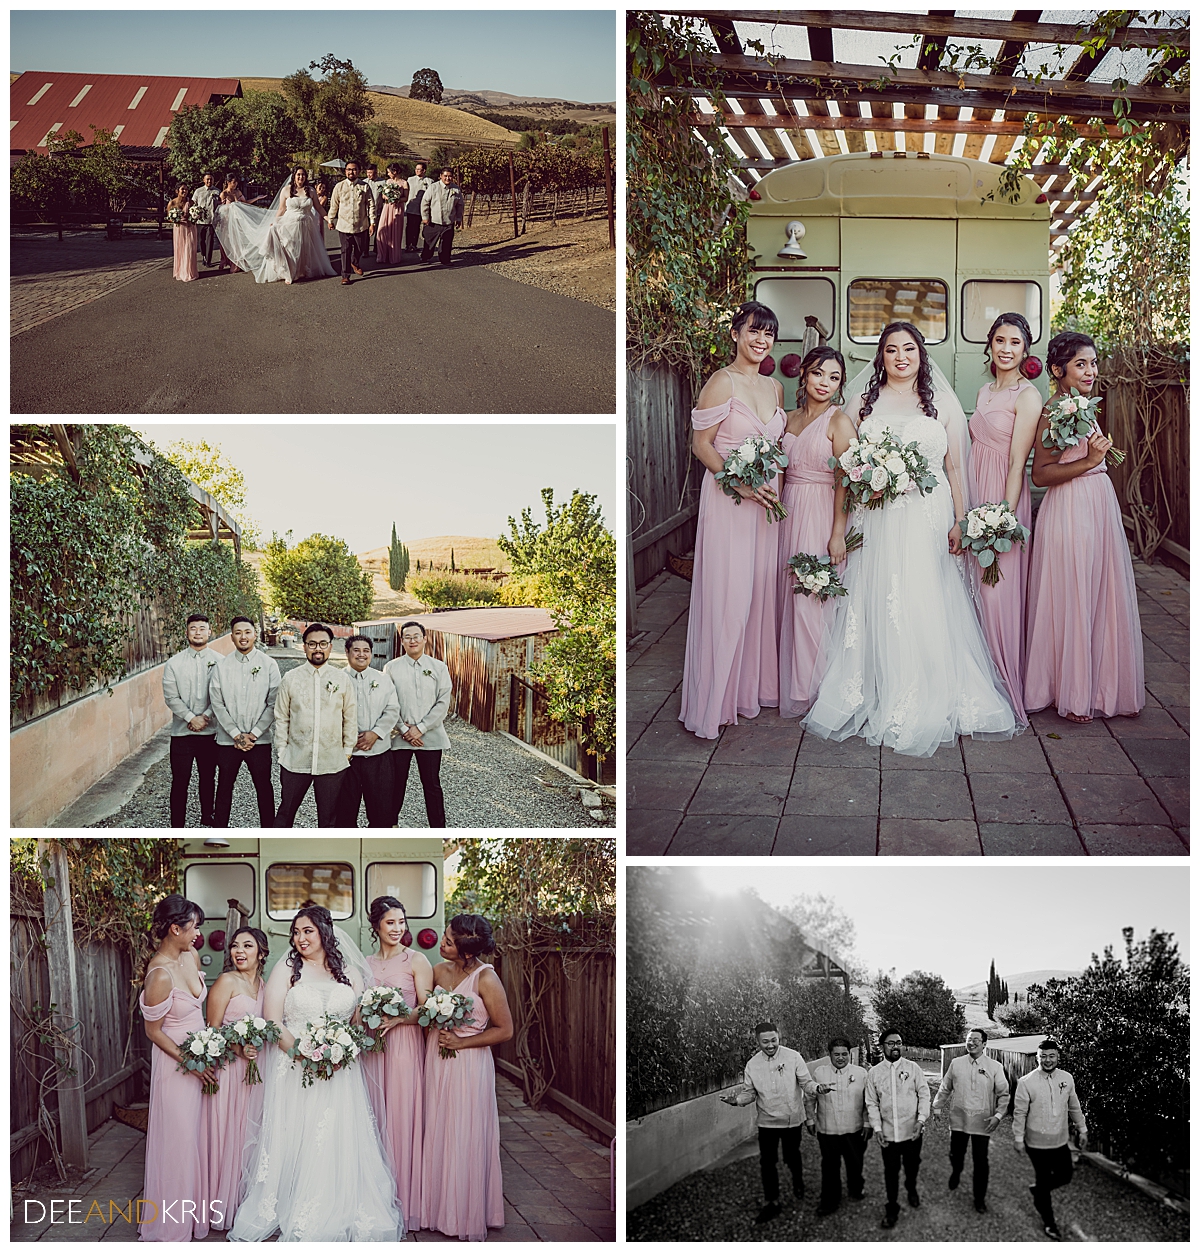 Five images of wedding party in various poses.